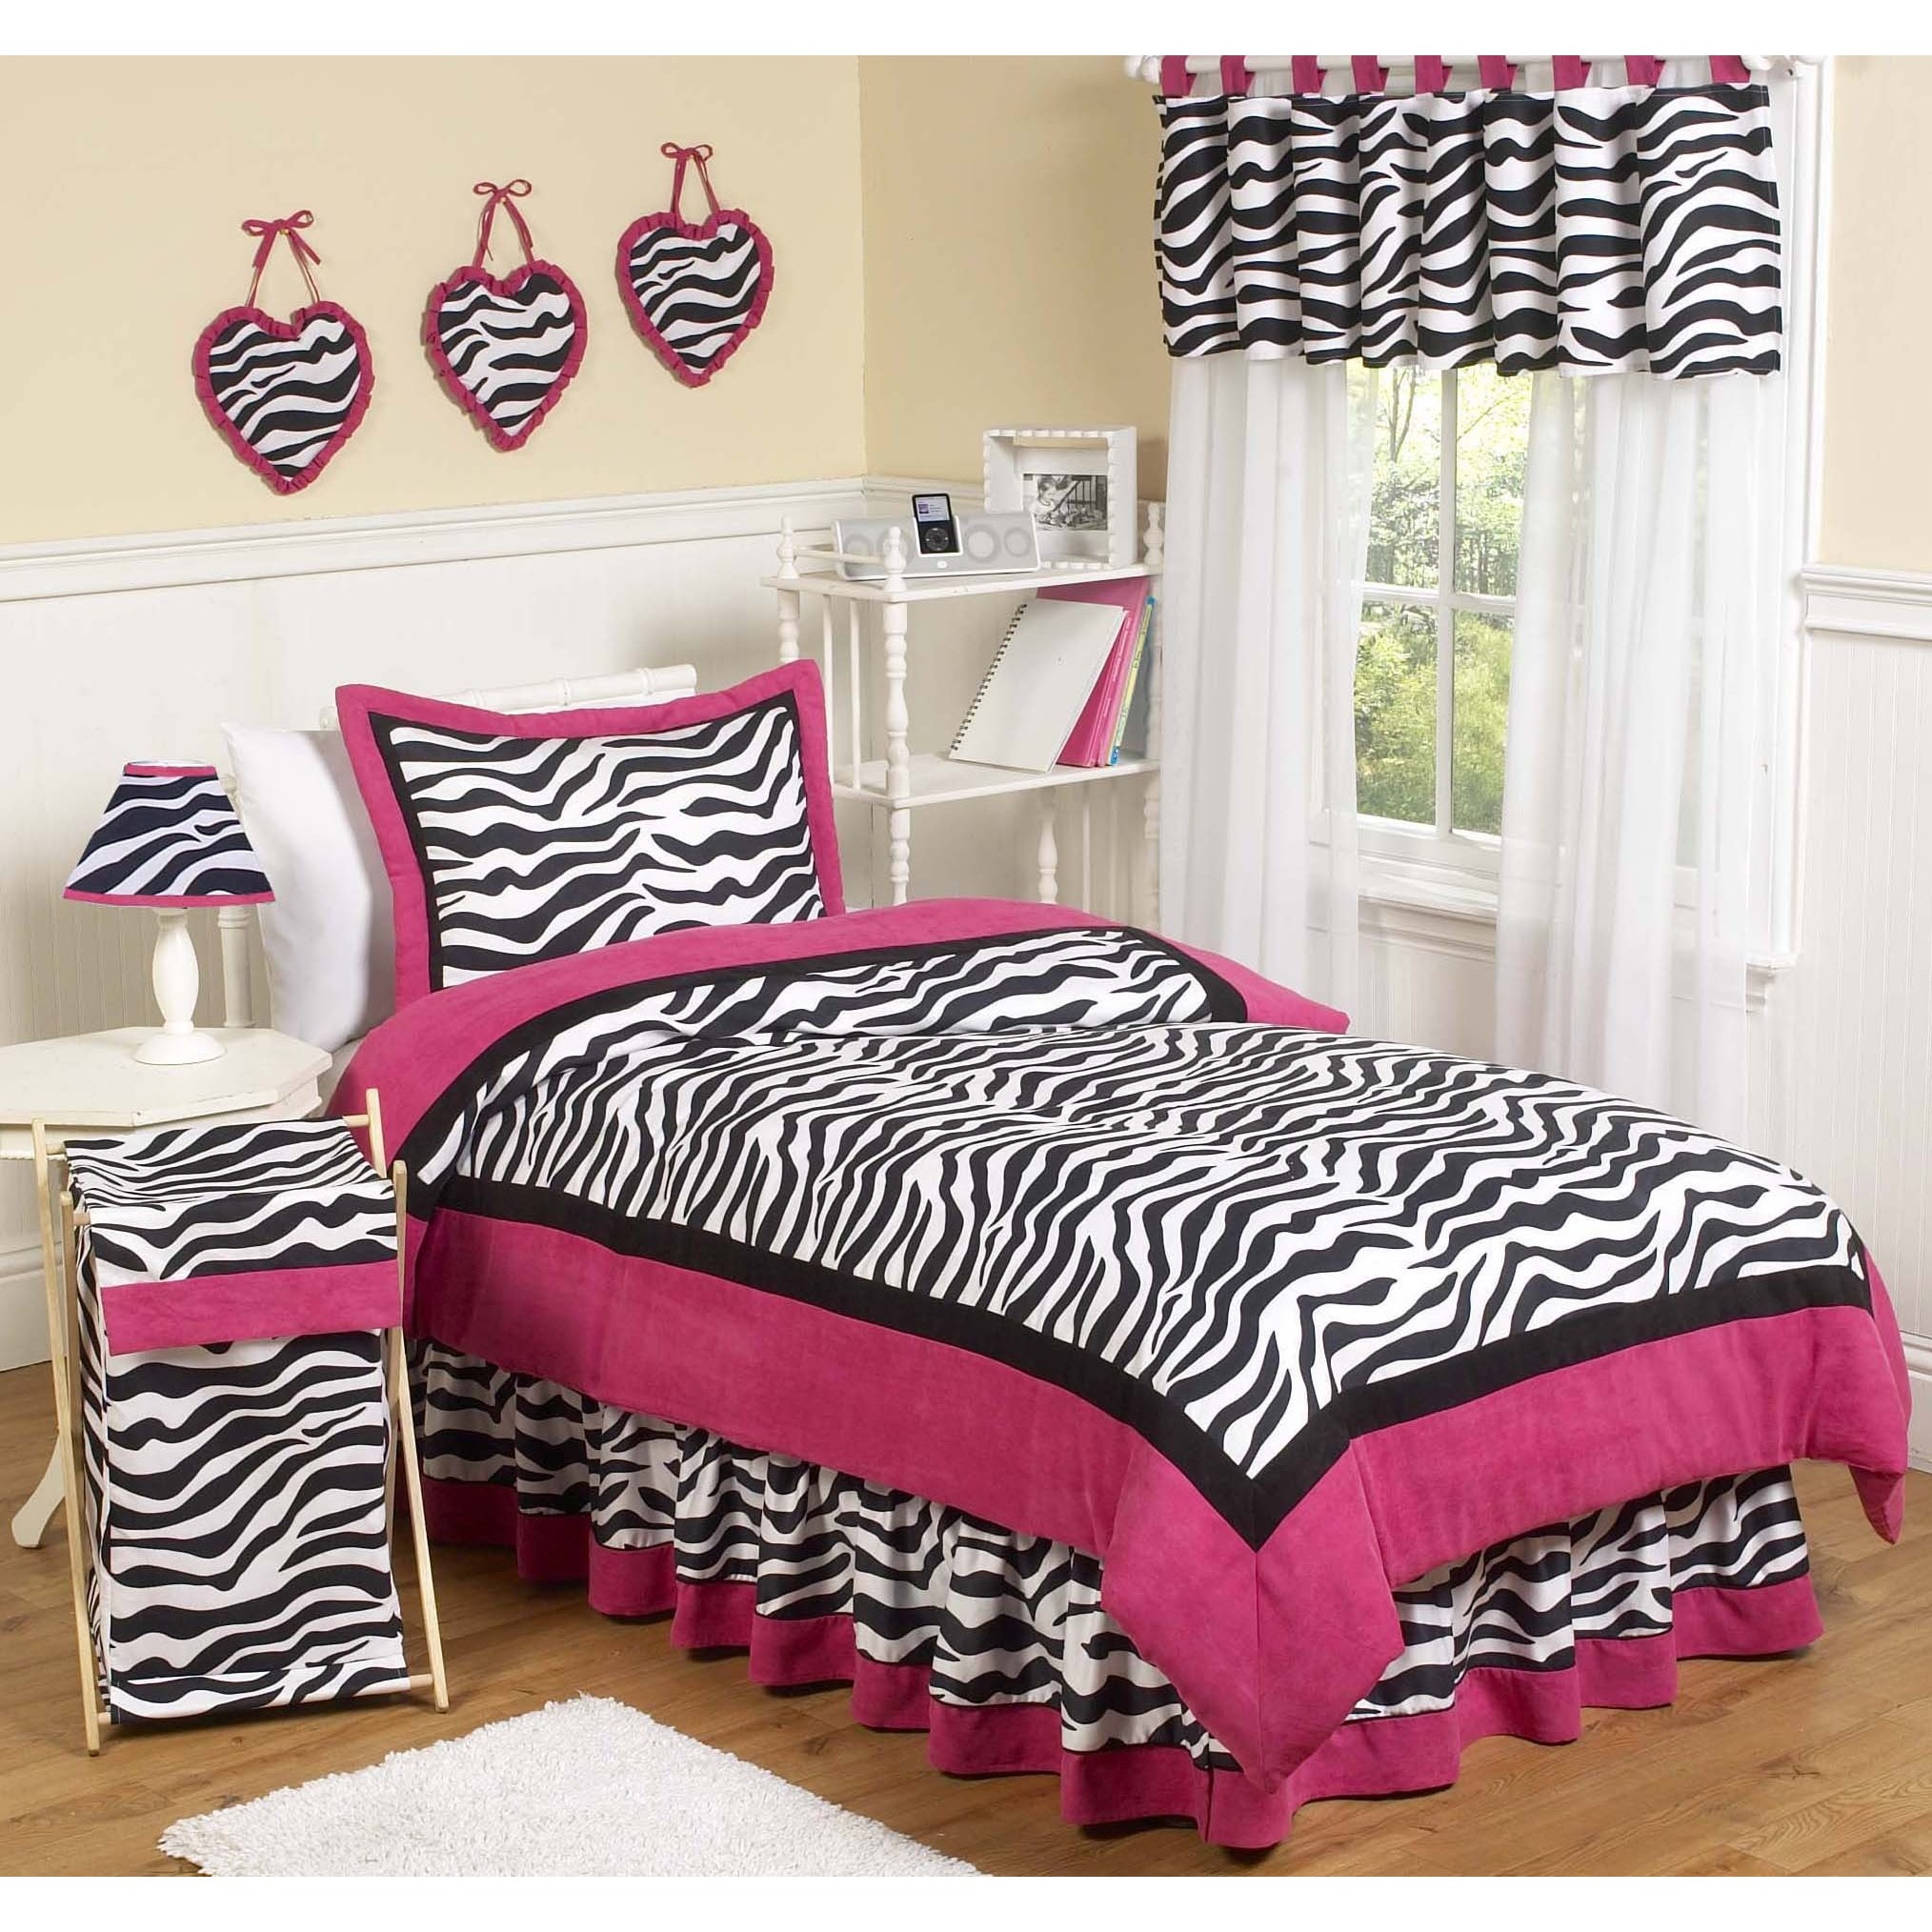 Sweet Jojo Designs Girls Zebra 4 piece Twin Comforter Set (Black/ white/ pinkMaterials Polyester microsuedeFill material PolyesterCare instructions Machine washableBrand Sweet Jojo DesignsComforter 62 inches wide x 86 inches longSham 20 inches wide 